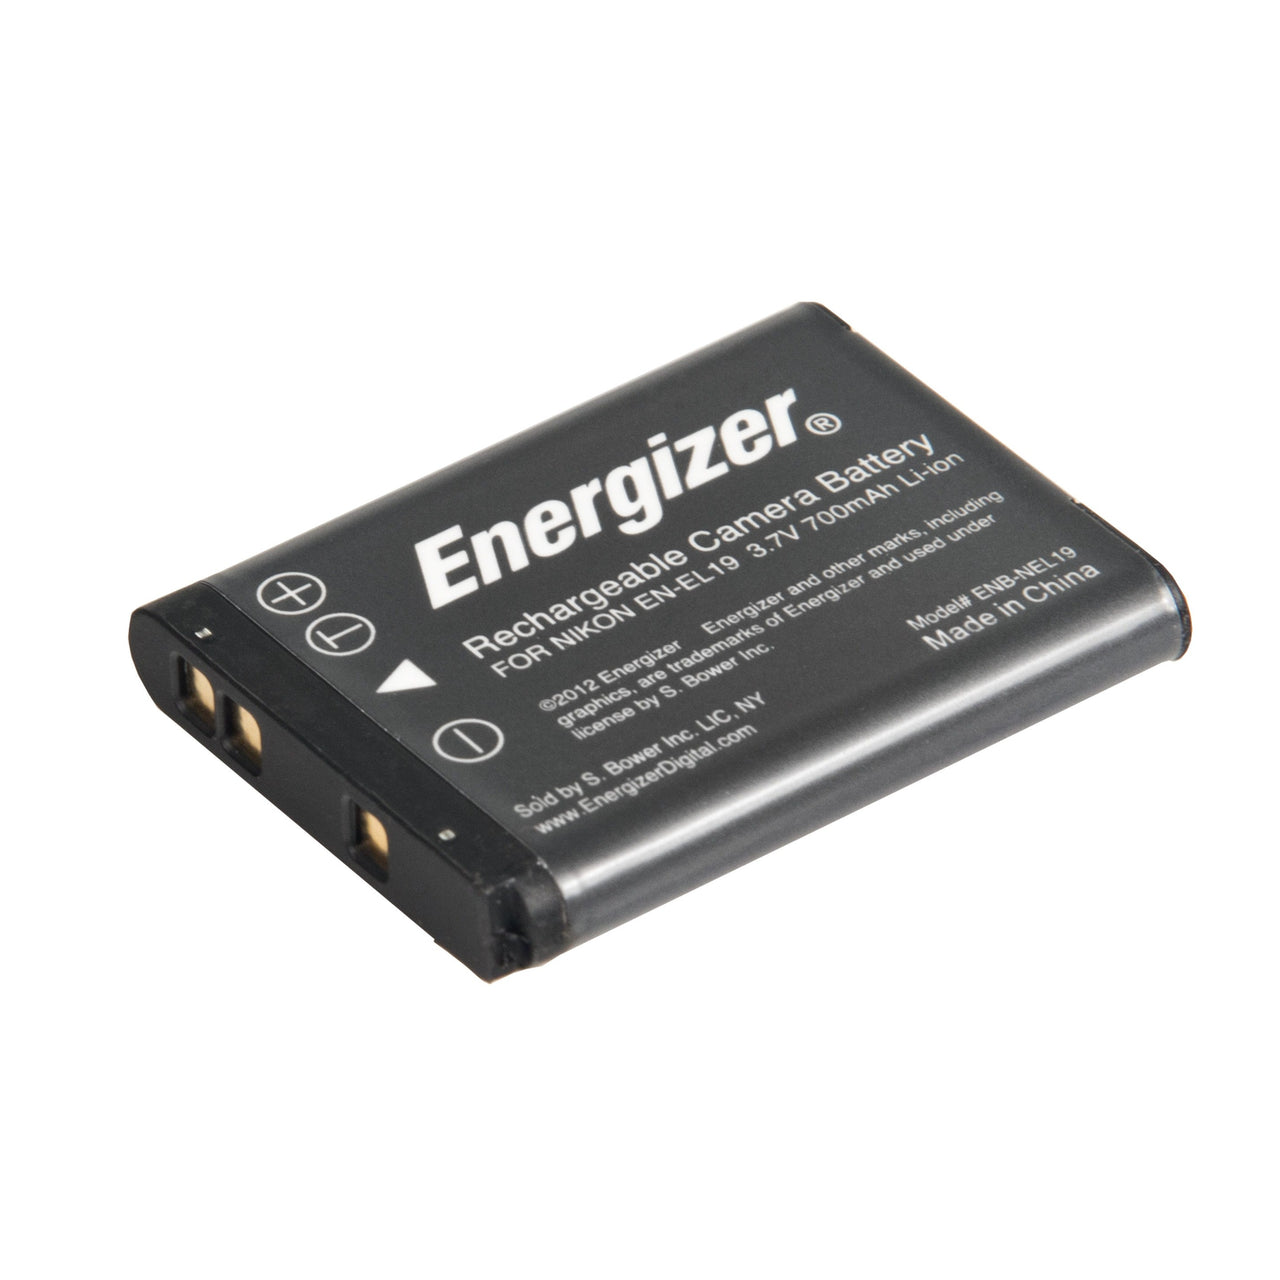 Energizer Enb Nel19 Digital Replacement Battery For N